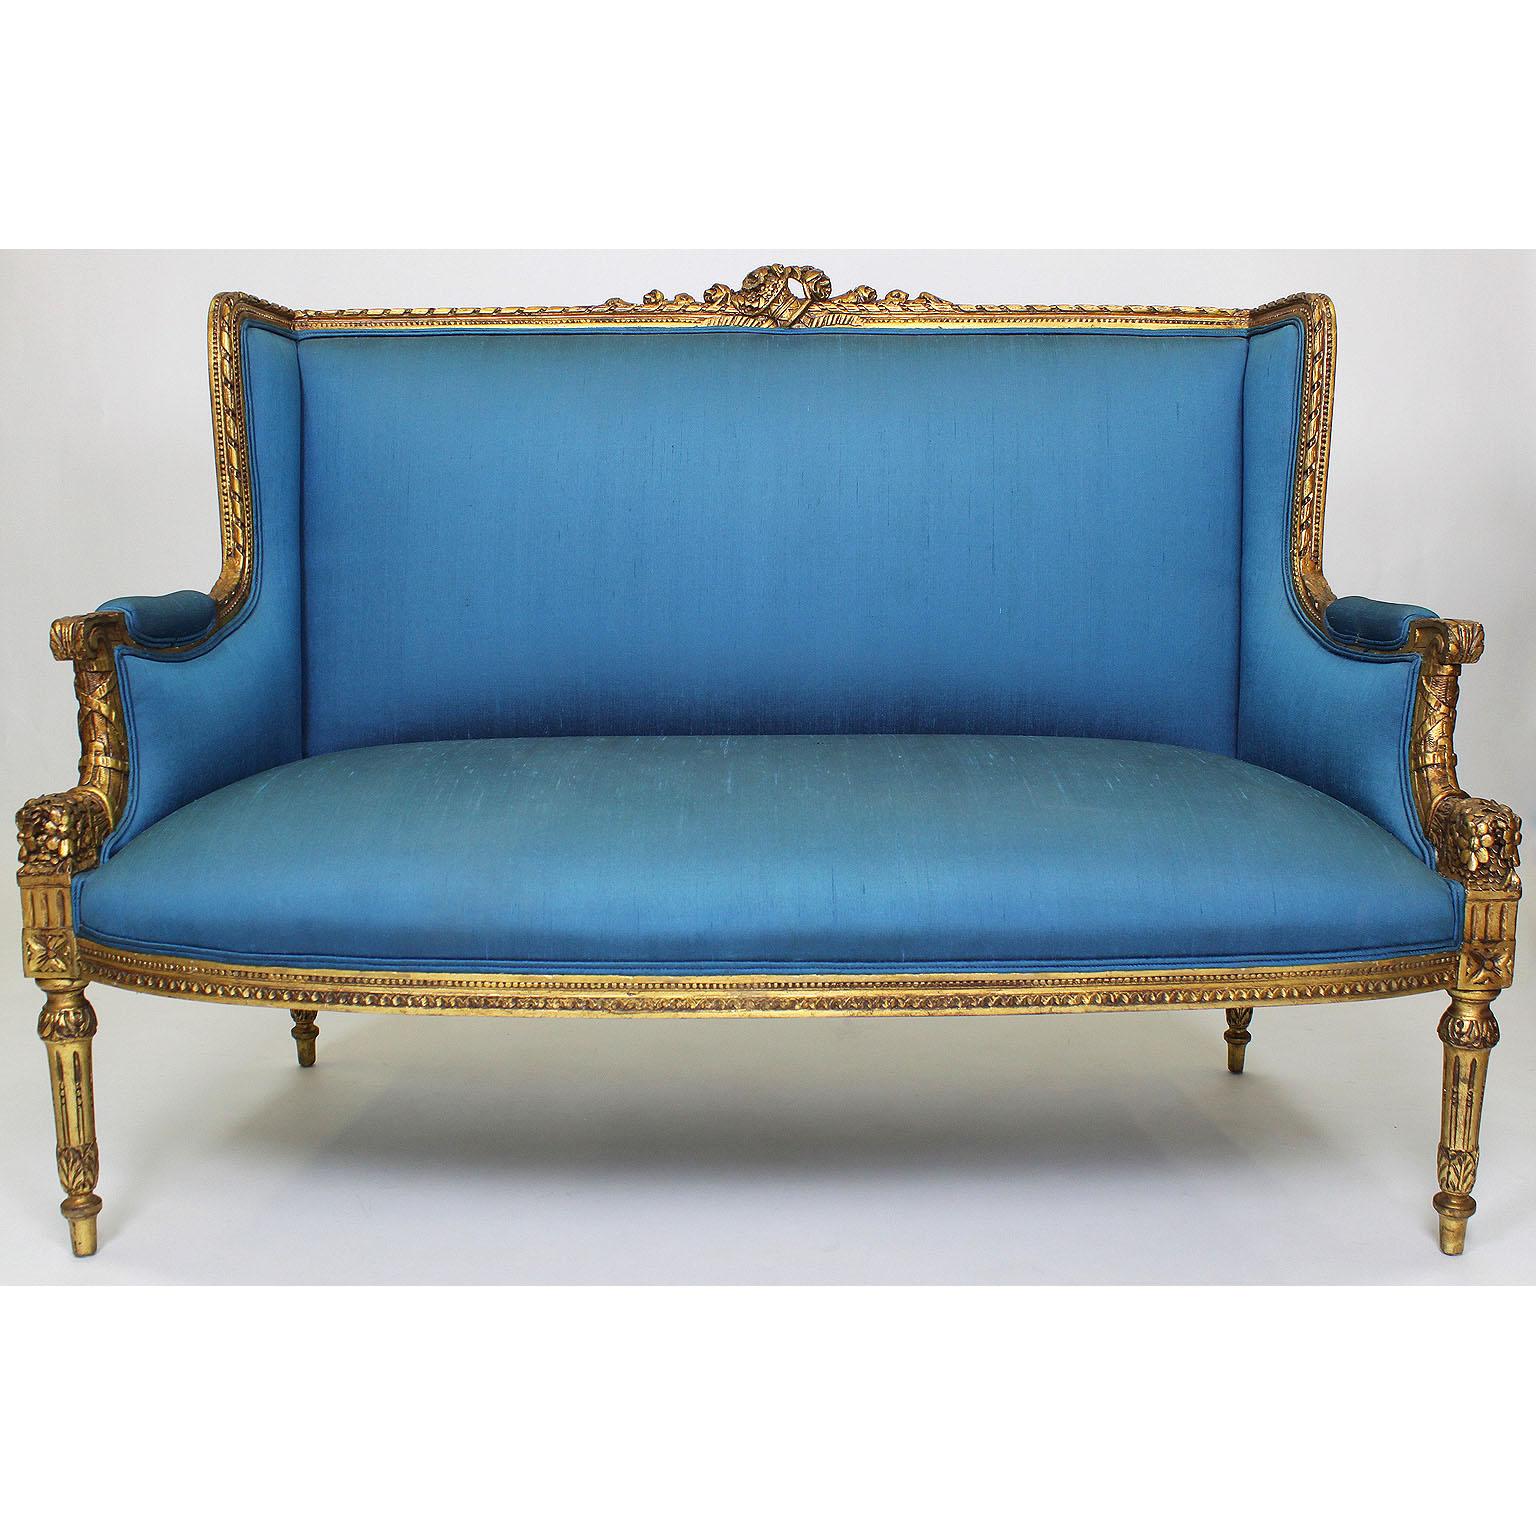 A French 19th-20th century Belle époque Louis XVI Style bergère giltwood carved three-piece salon or parlor set, comprising of a two-corps settee and two armchairs, all upholstered in a blue raw-silk Paris, circa 1900.

The silk has some streak